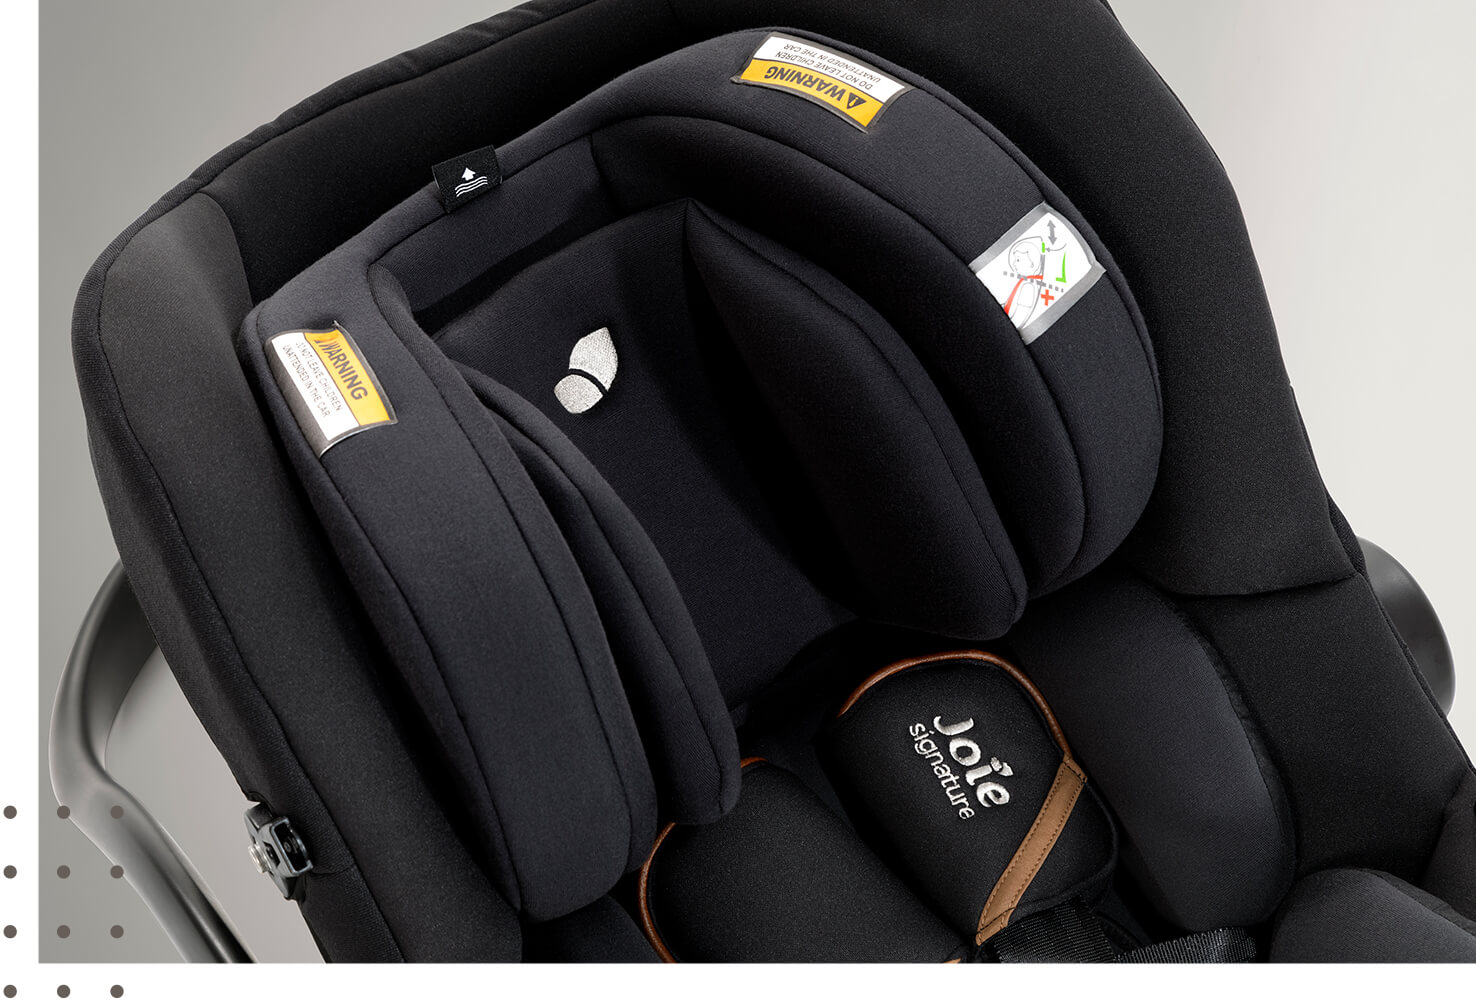 Gray Joie I-Gemm 2 infant car seat facing straight on with the canopy attached.